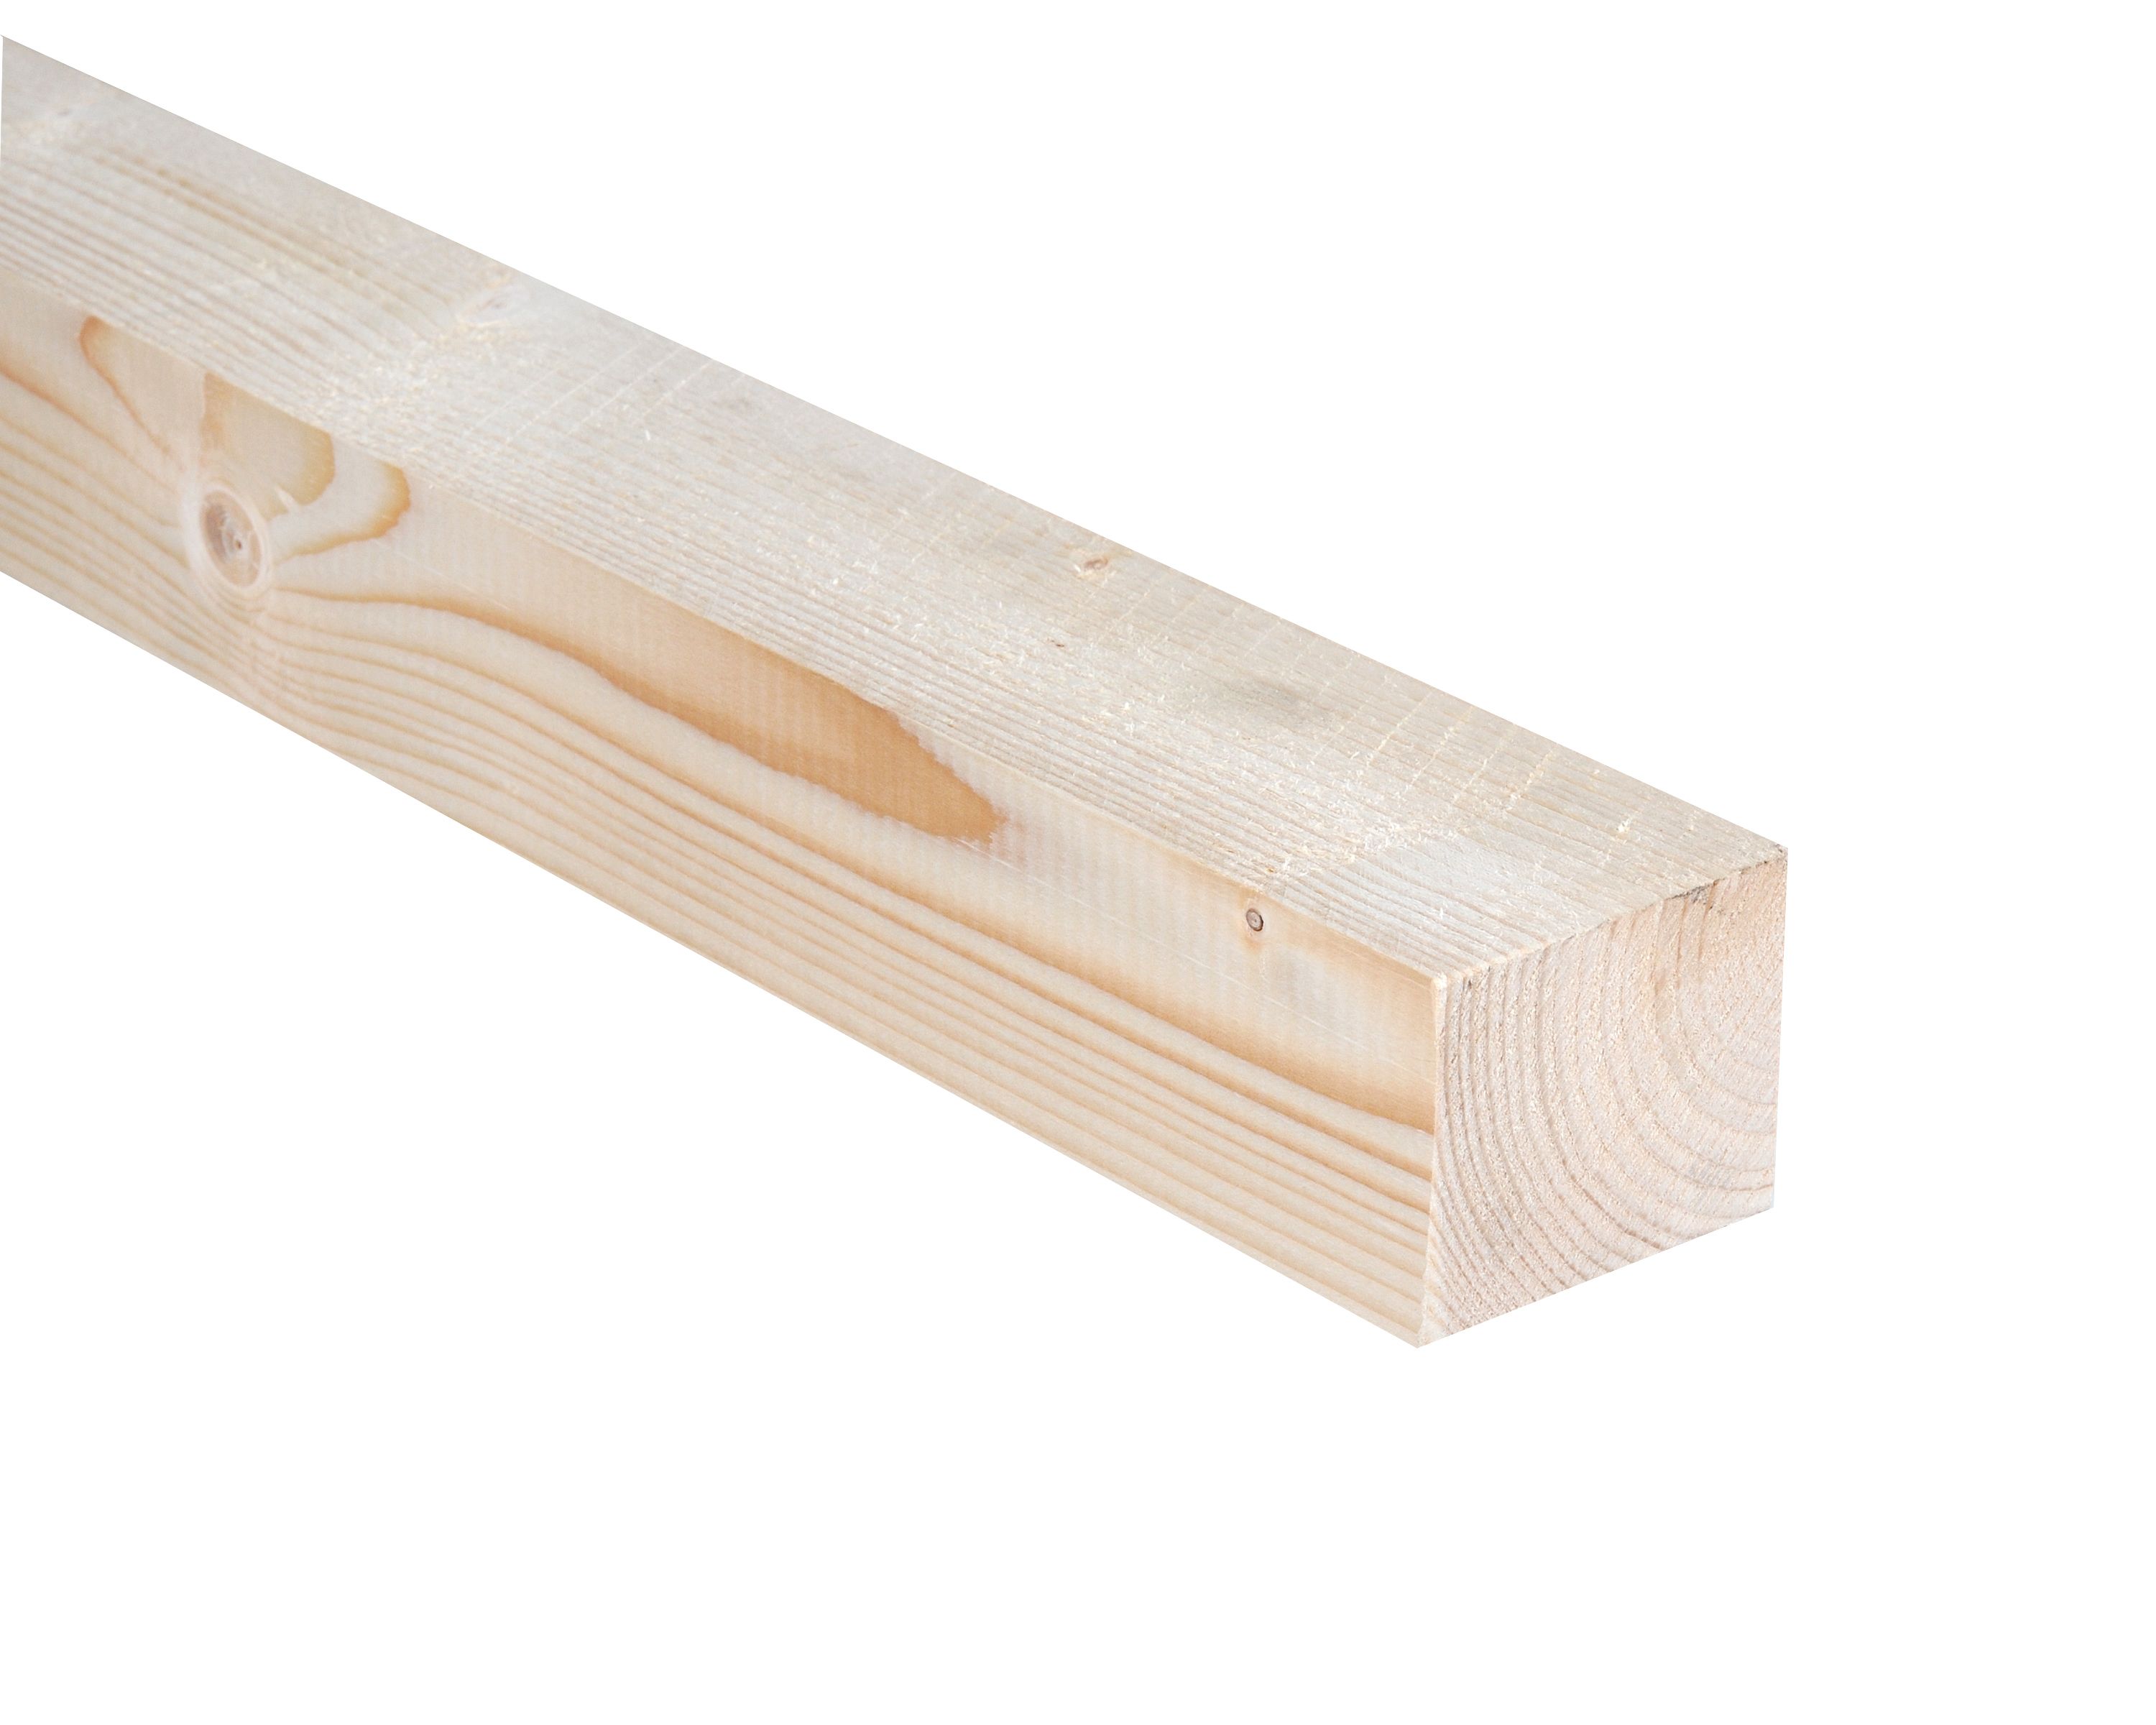 Whitewood spruce Timber (L)2.4m (W)50mm (T)47mm, Pack of 8